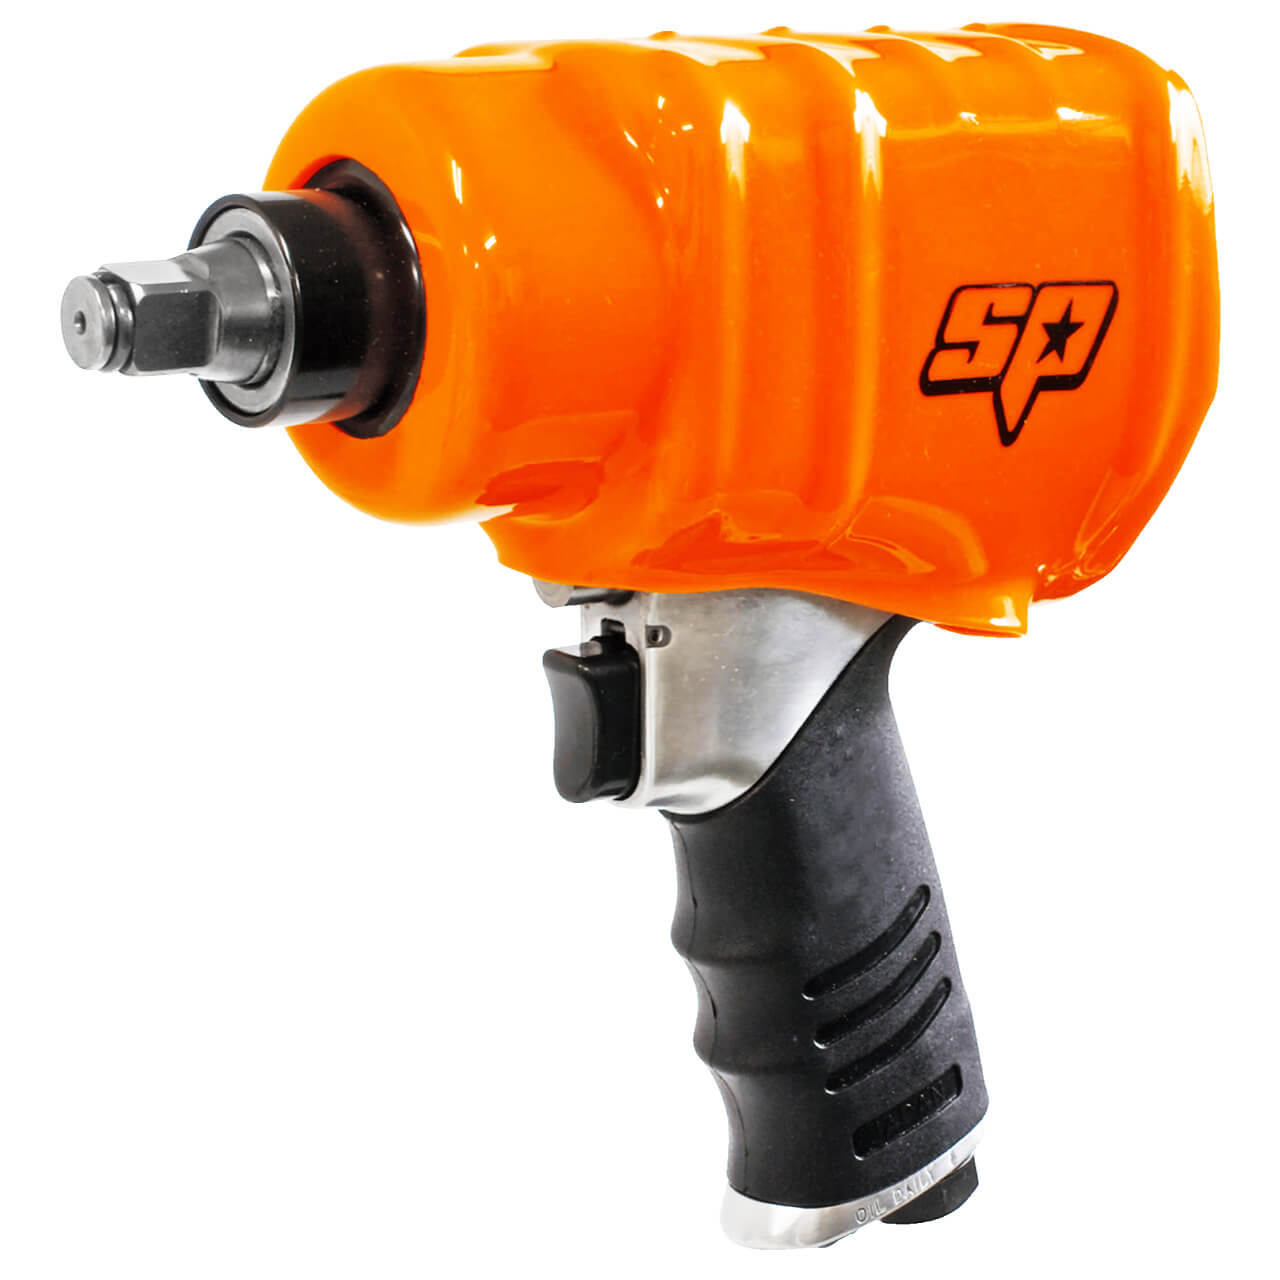 SP Tools 1/2 Dr. Air Impact Wrench